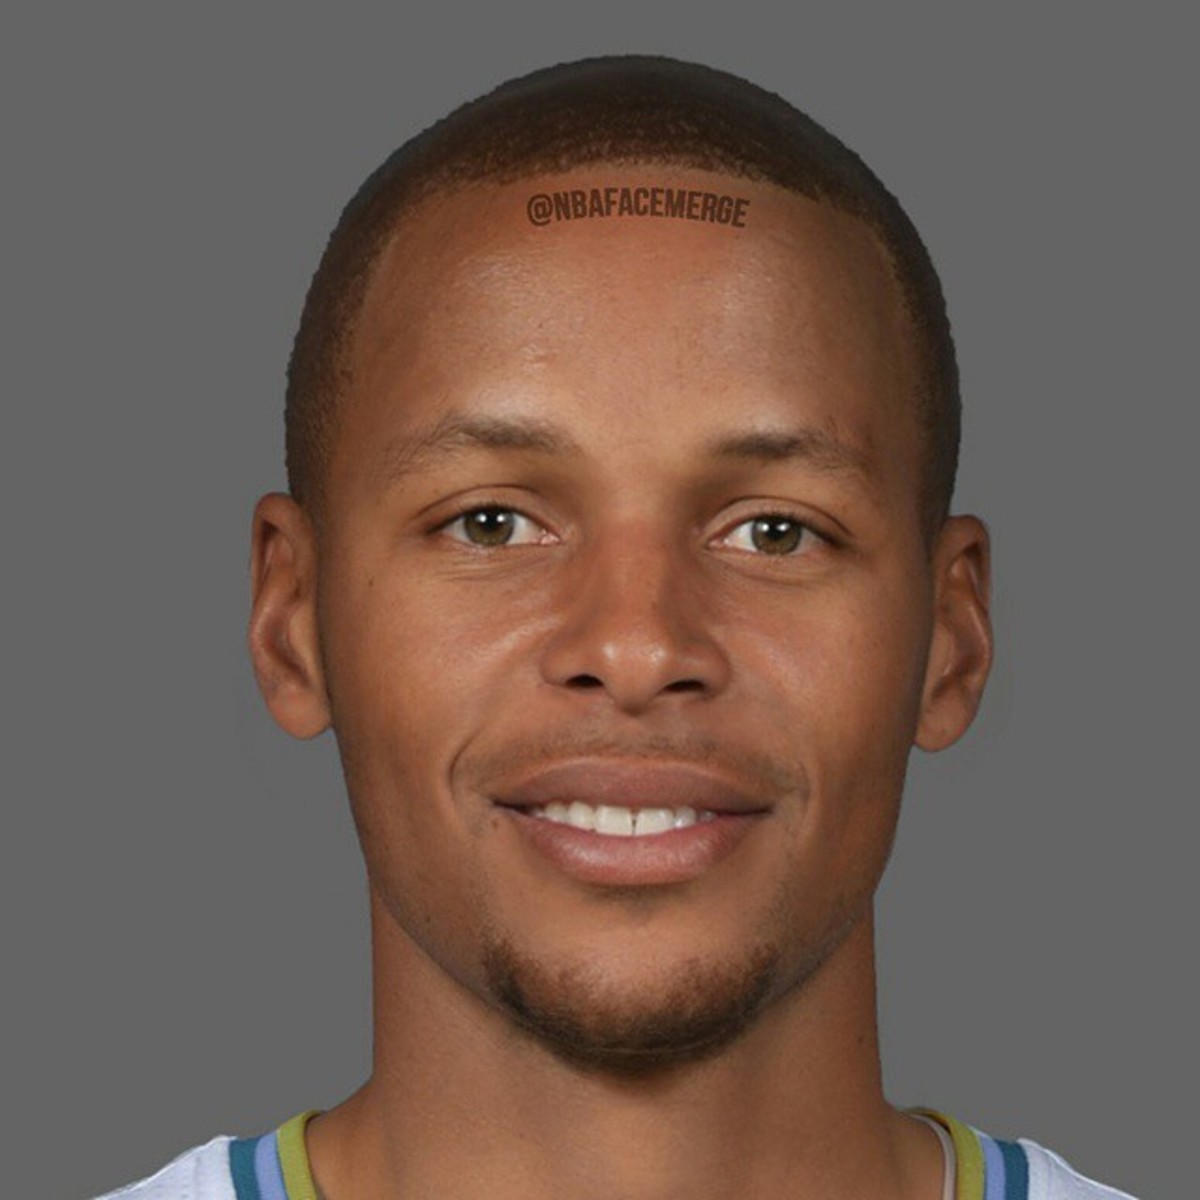 Ray Allen - Stephen Curry